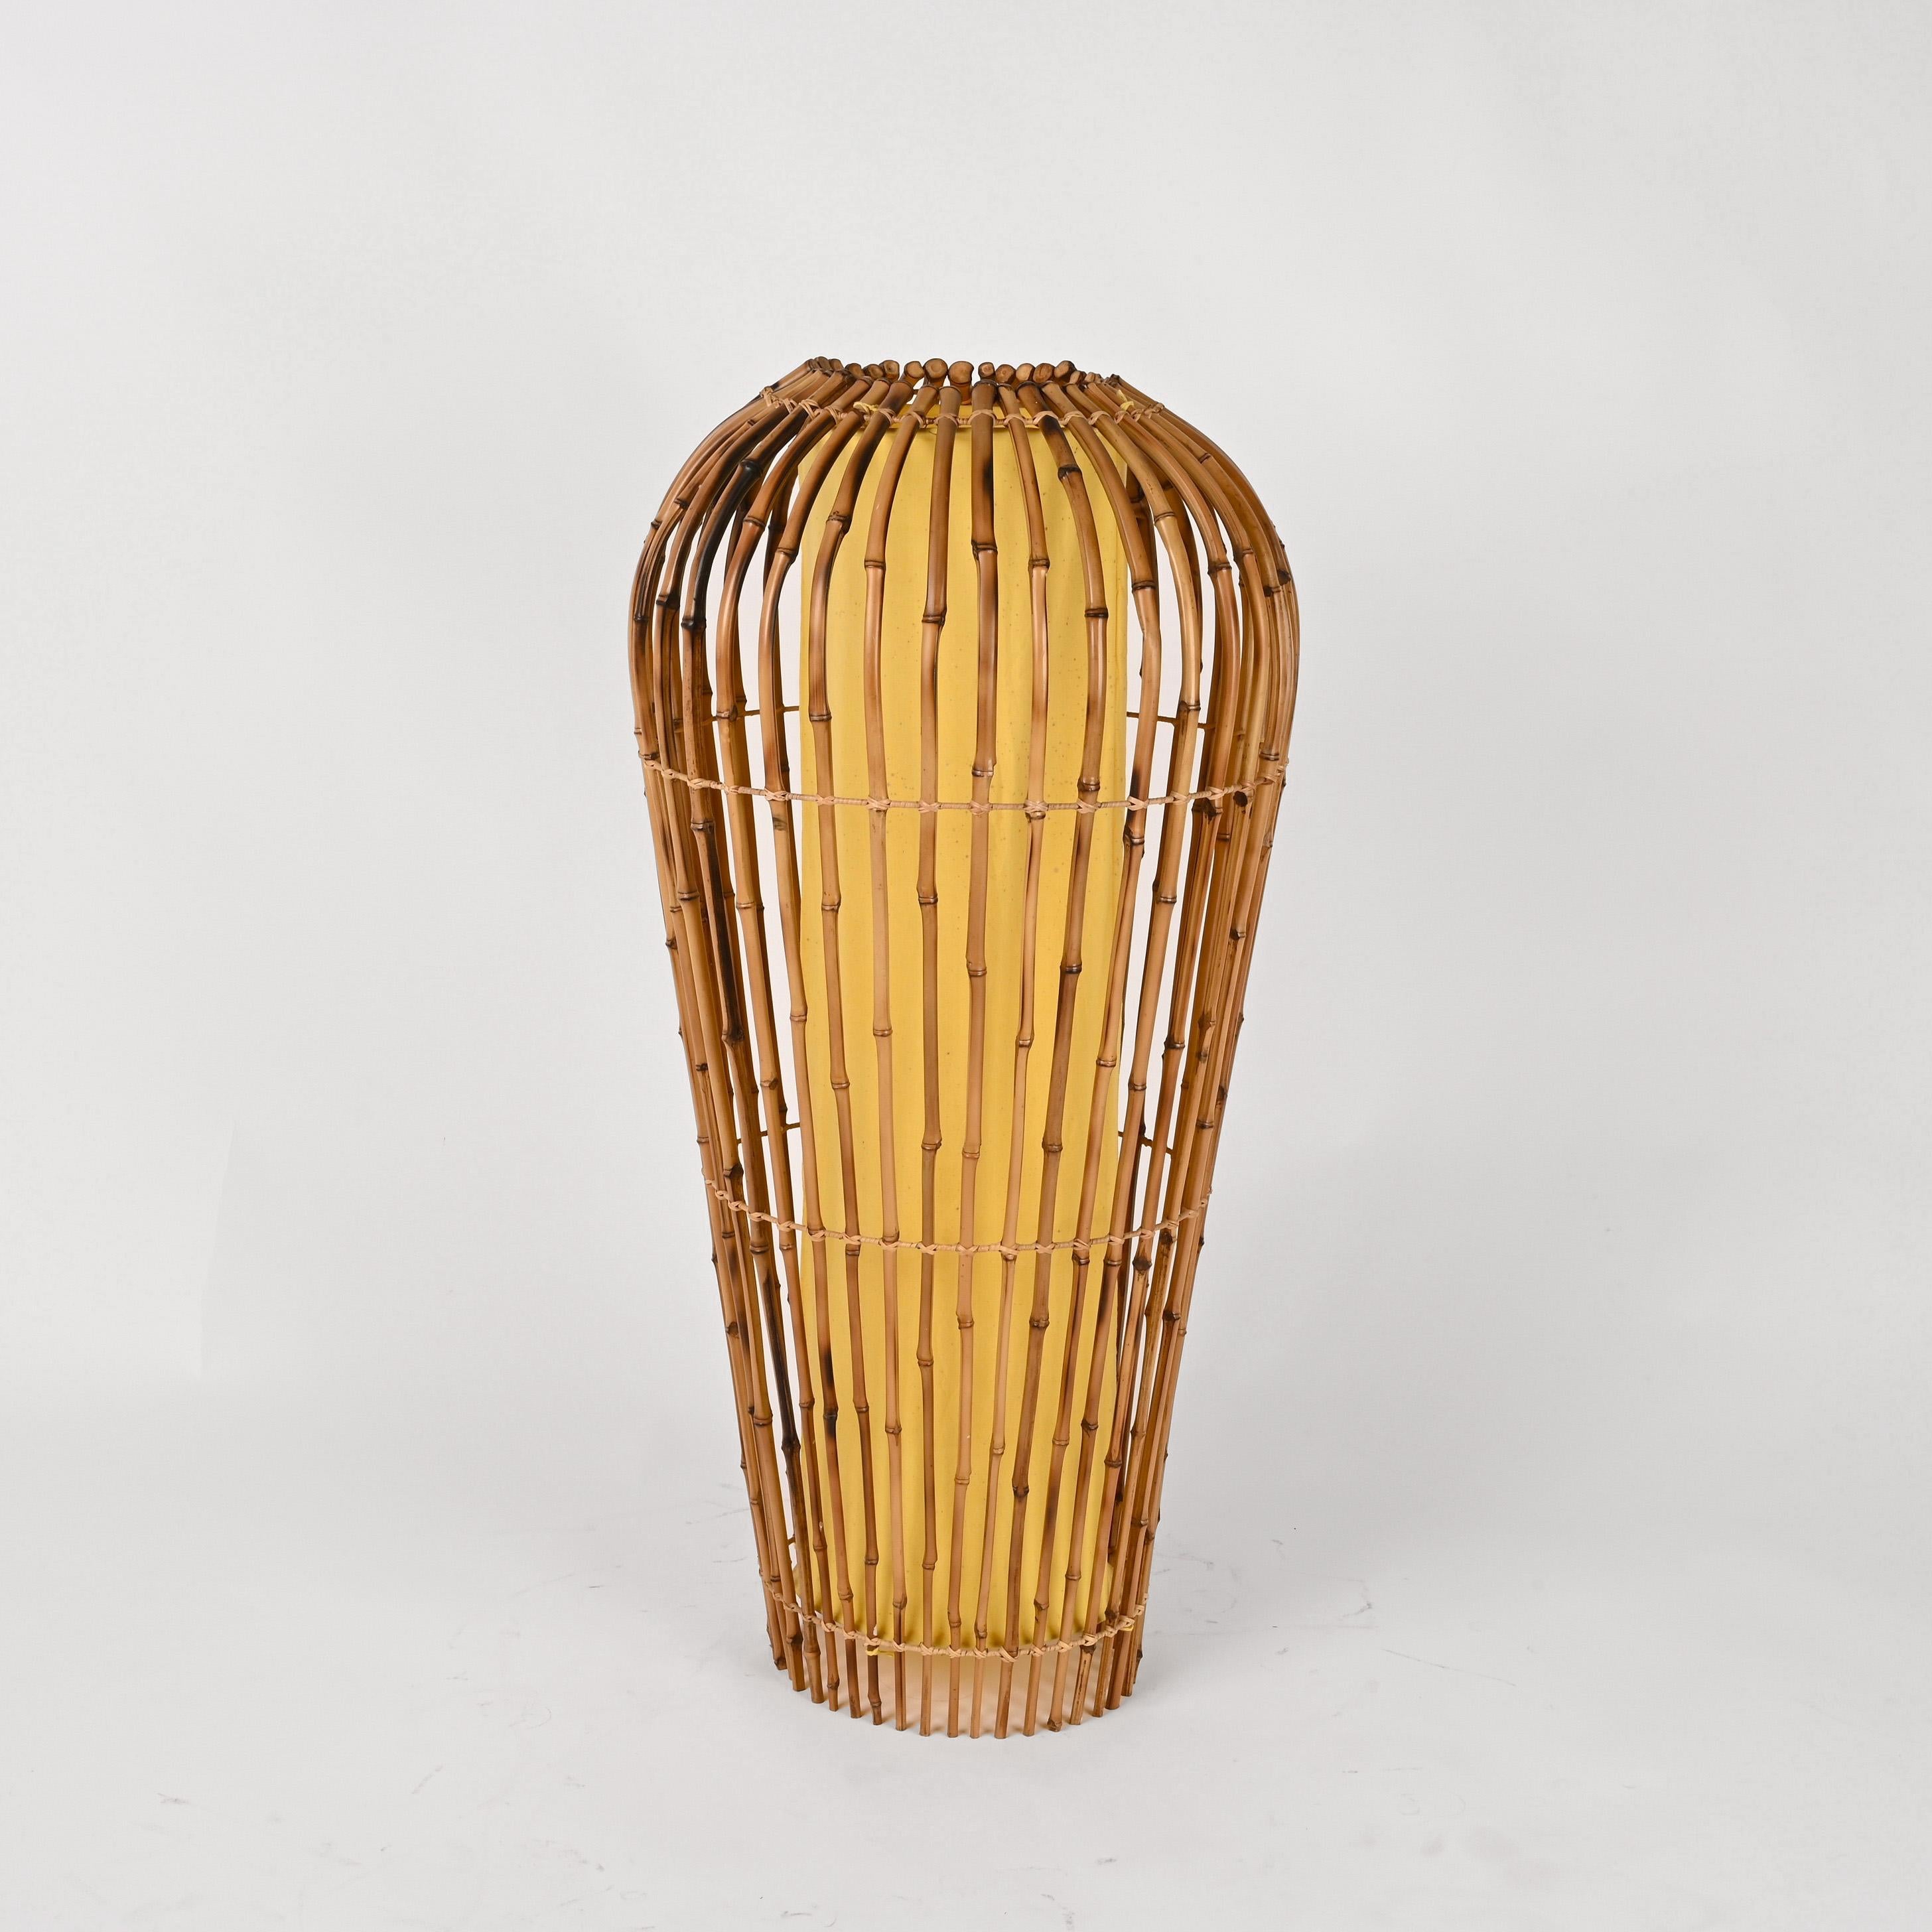 Wonderful midcentury bamboo canes and rattan floor lamp. This amazing piece was designed in Italy during the 1970s after Franco Albini.

This item is unique has it has an original shape with a narrow base that gets wider and wider to the top with